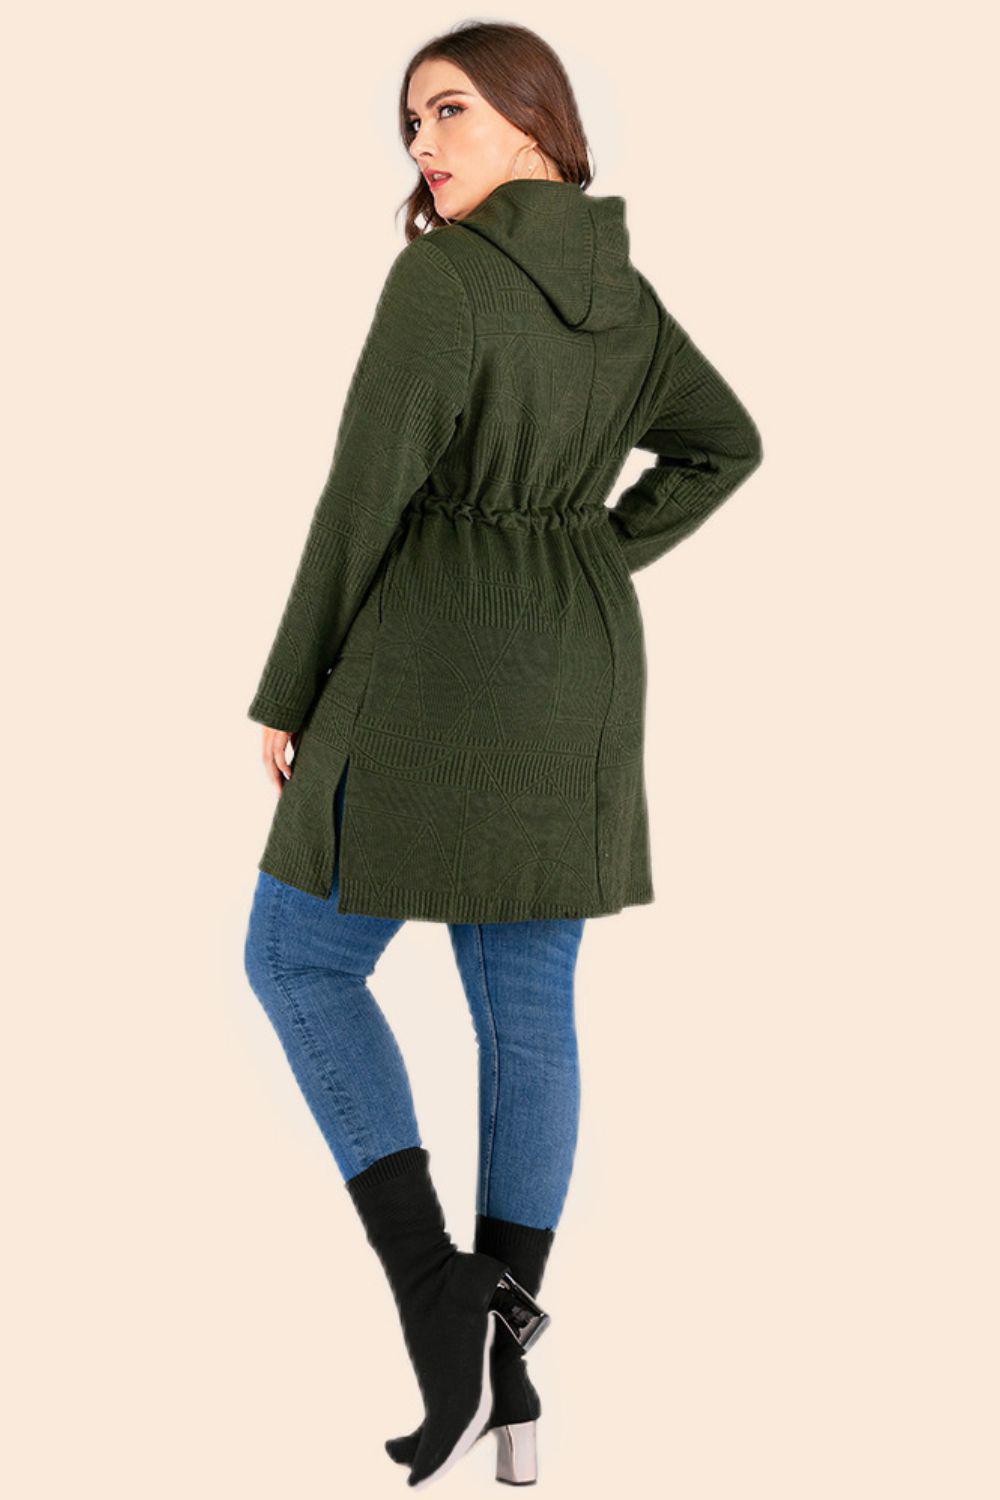 Plus Size Drawstring Waist Hooded Cardigan with Pockets BLUE ZONE PLANET